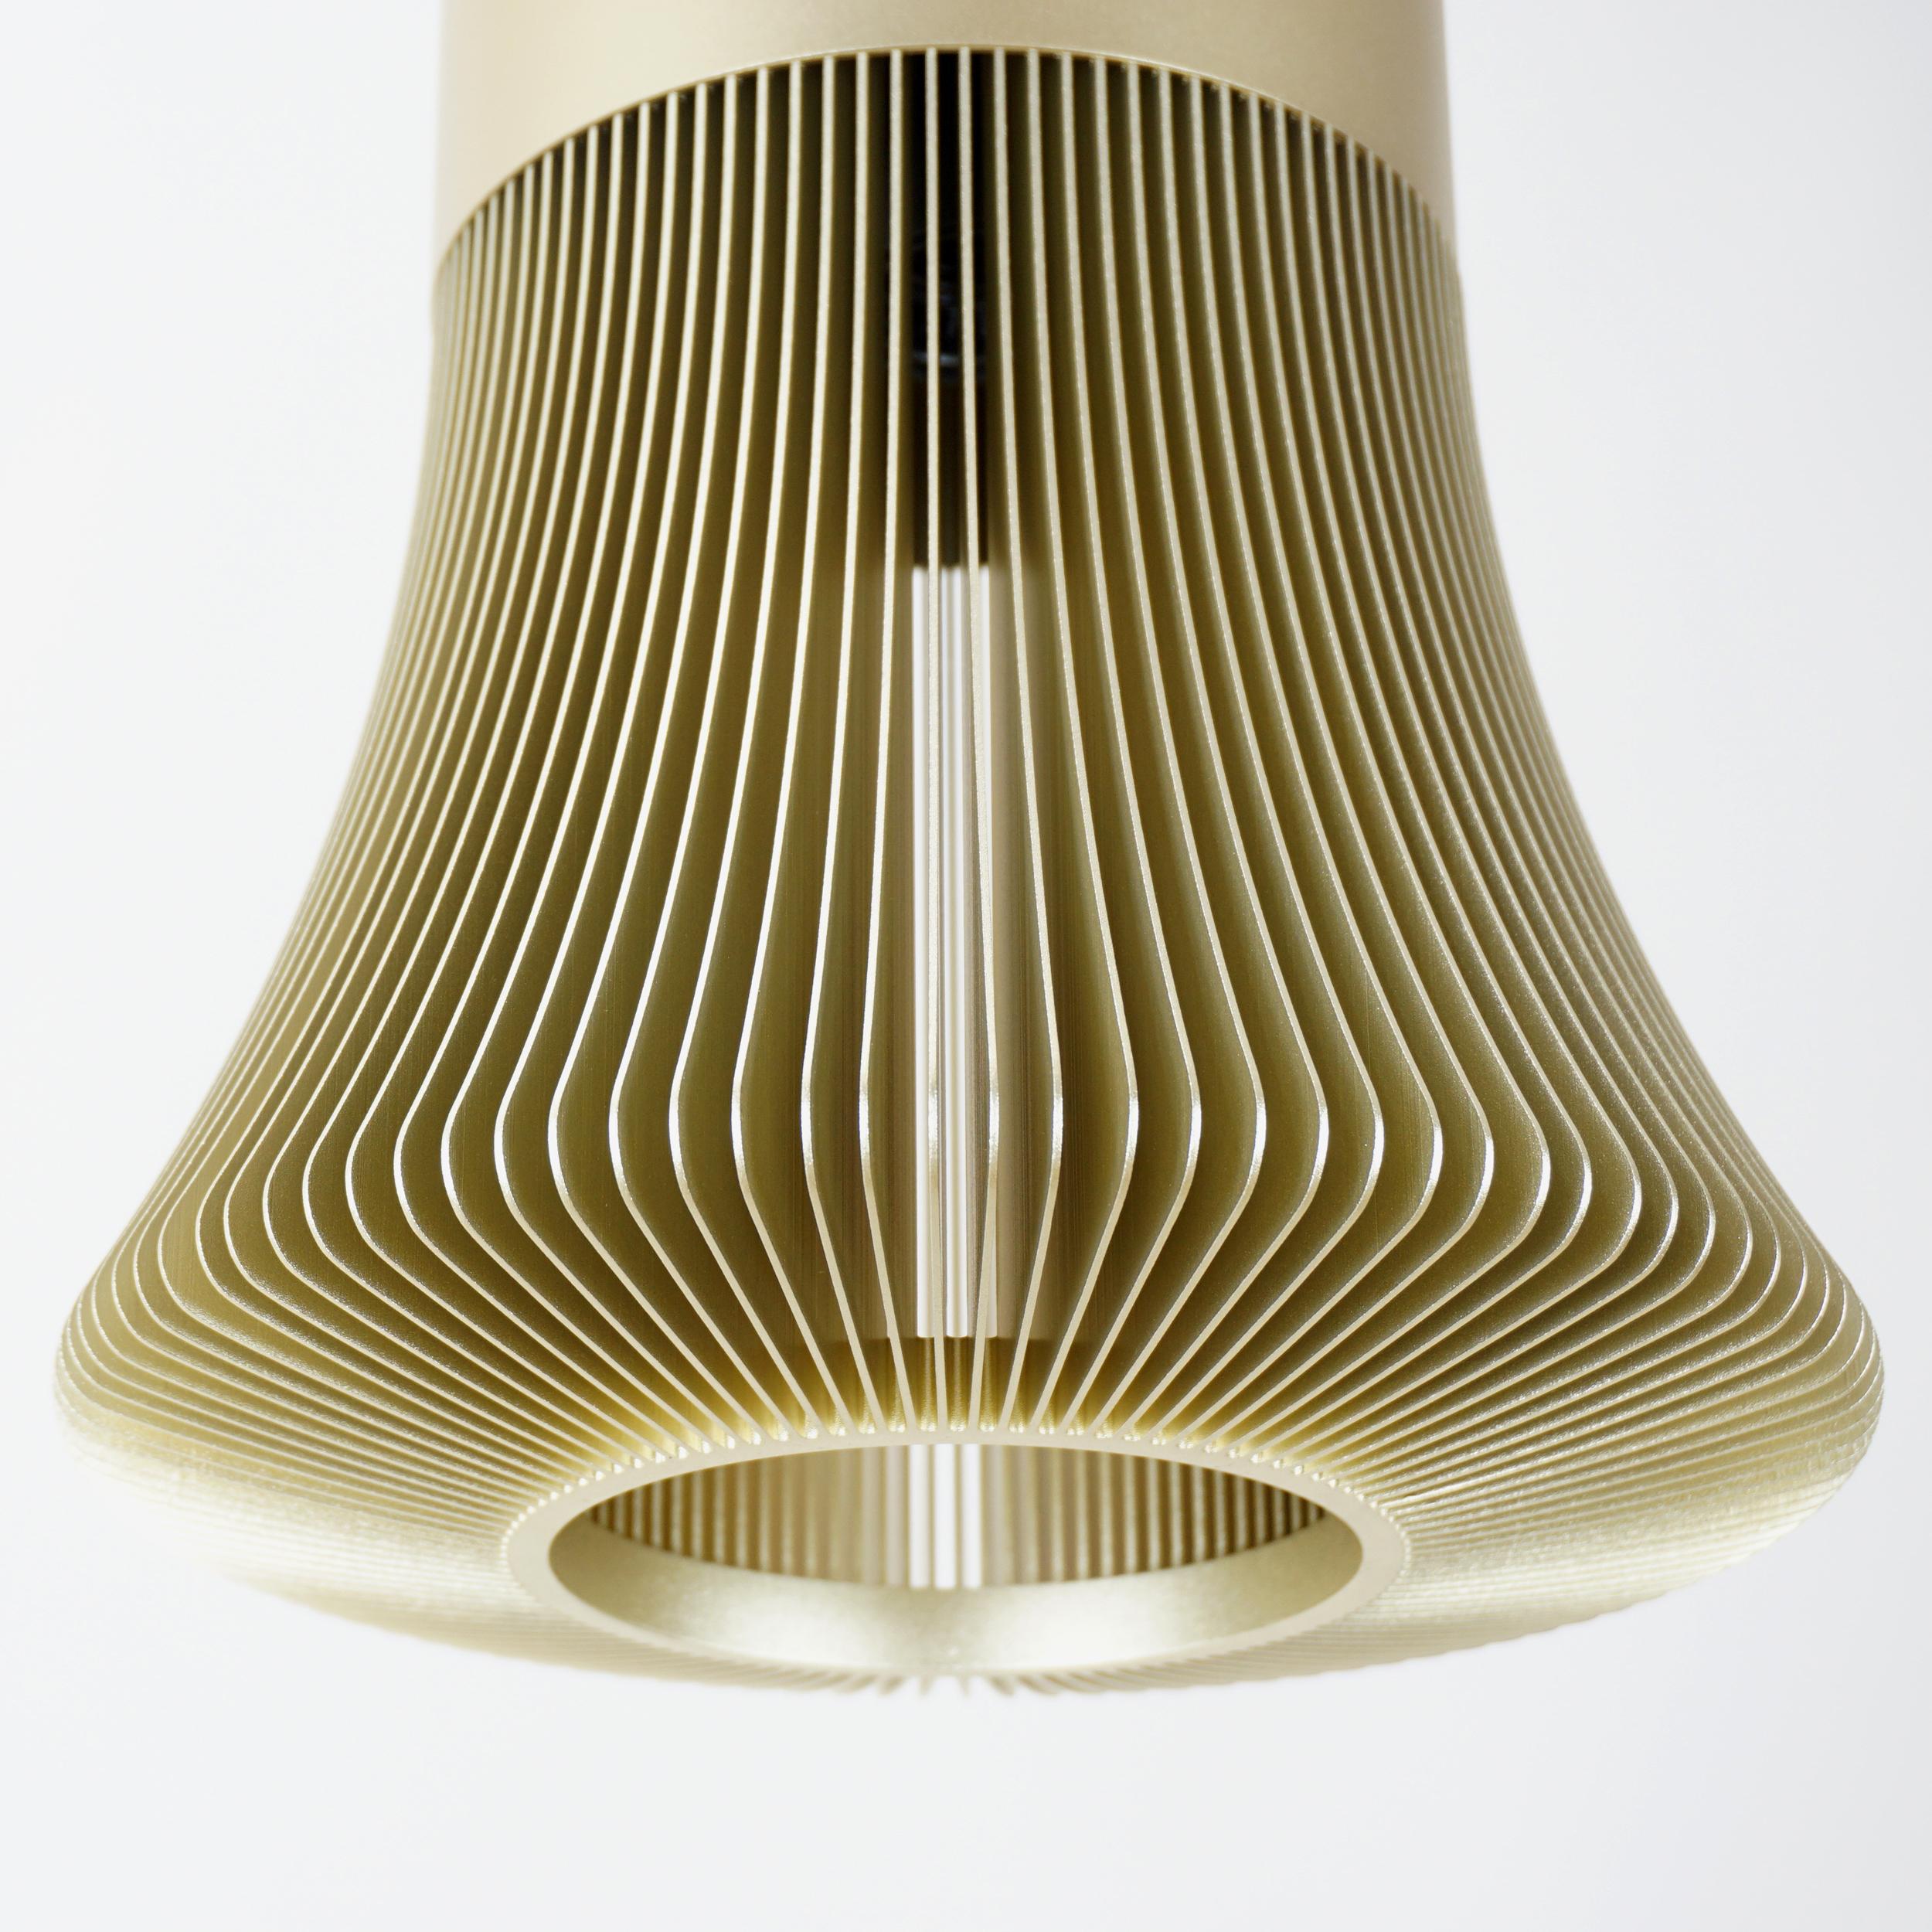 British Le Sergent Pendant Lamp Anodized Aluminum in Gold Color by Michael Young For Sale